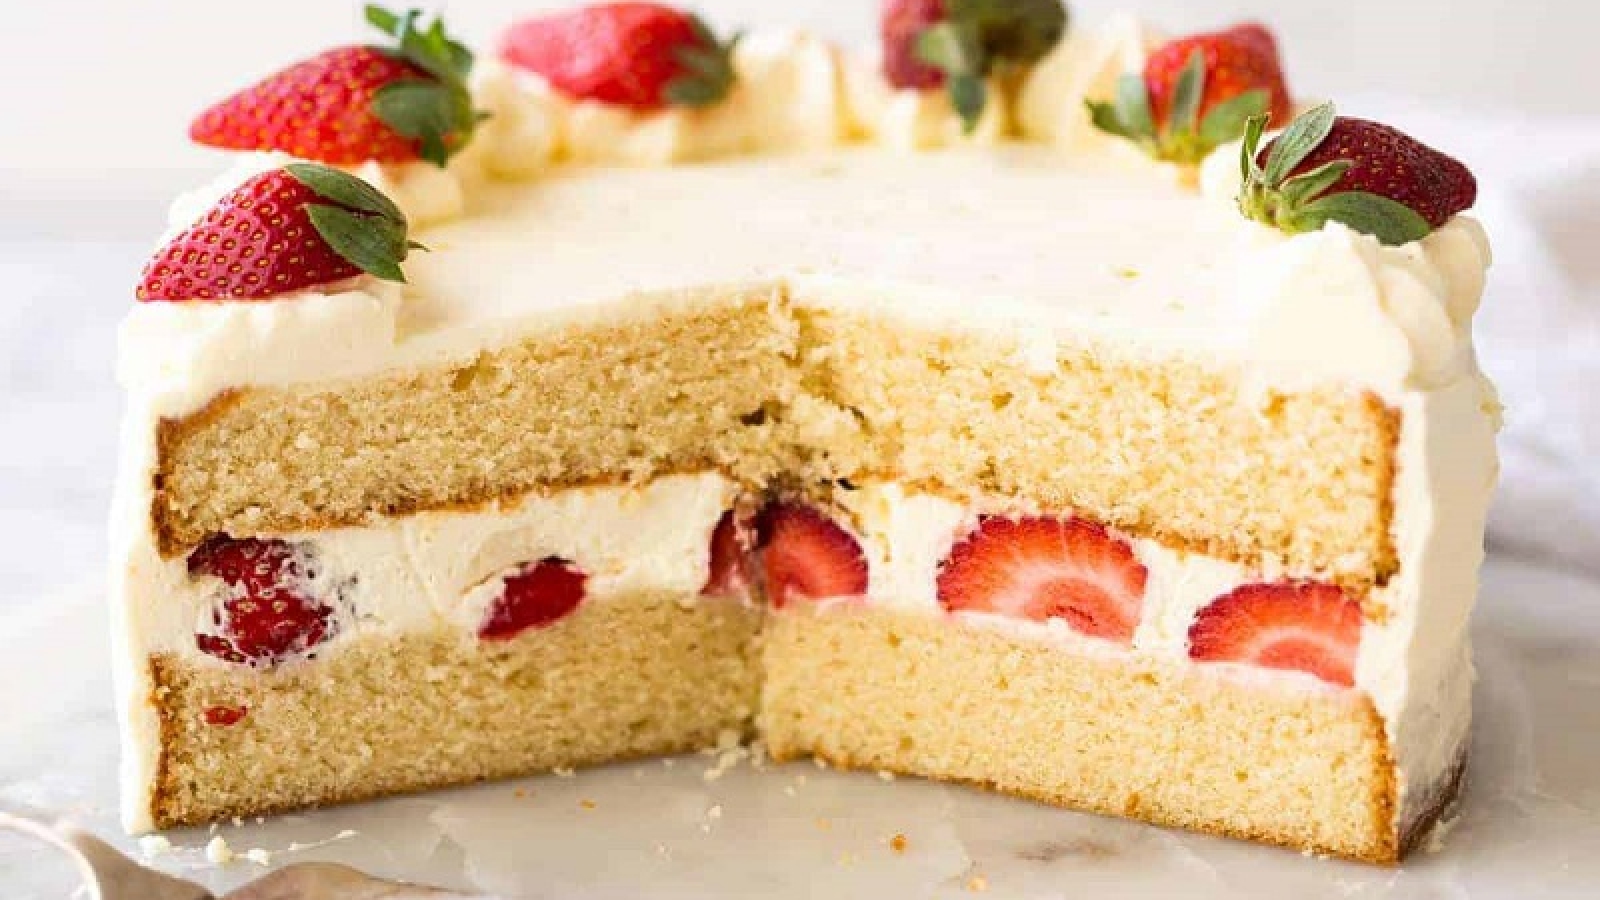 The diet cake recipe for a healthy and diabetes-free Mother's Day